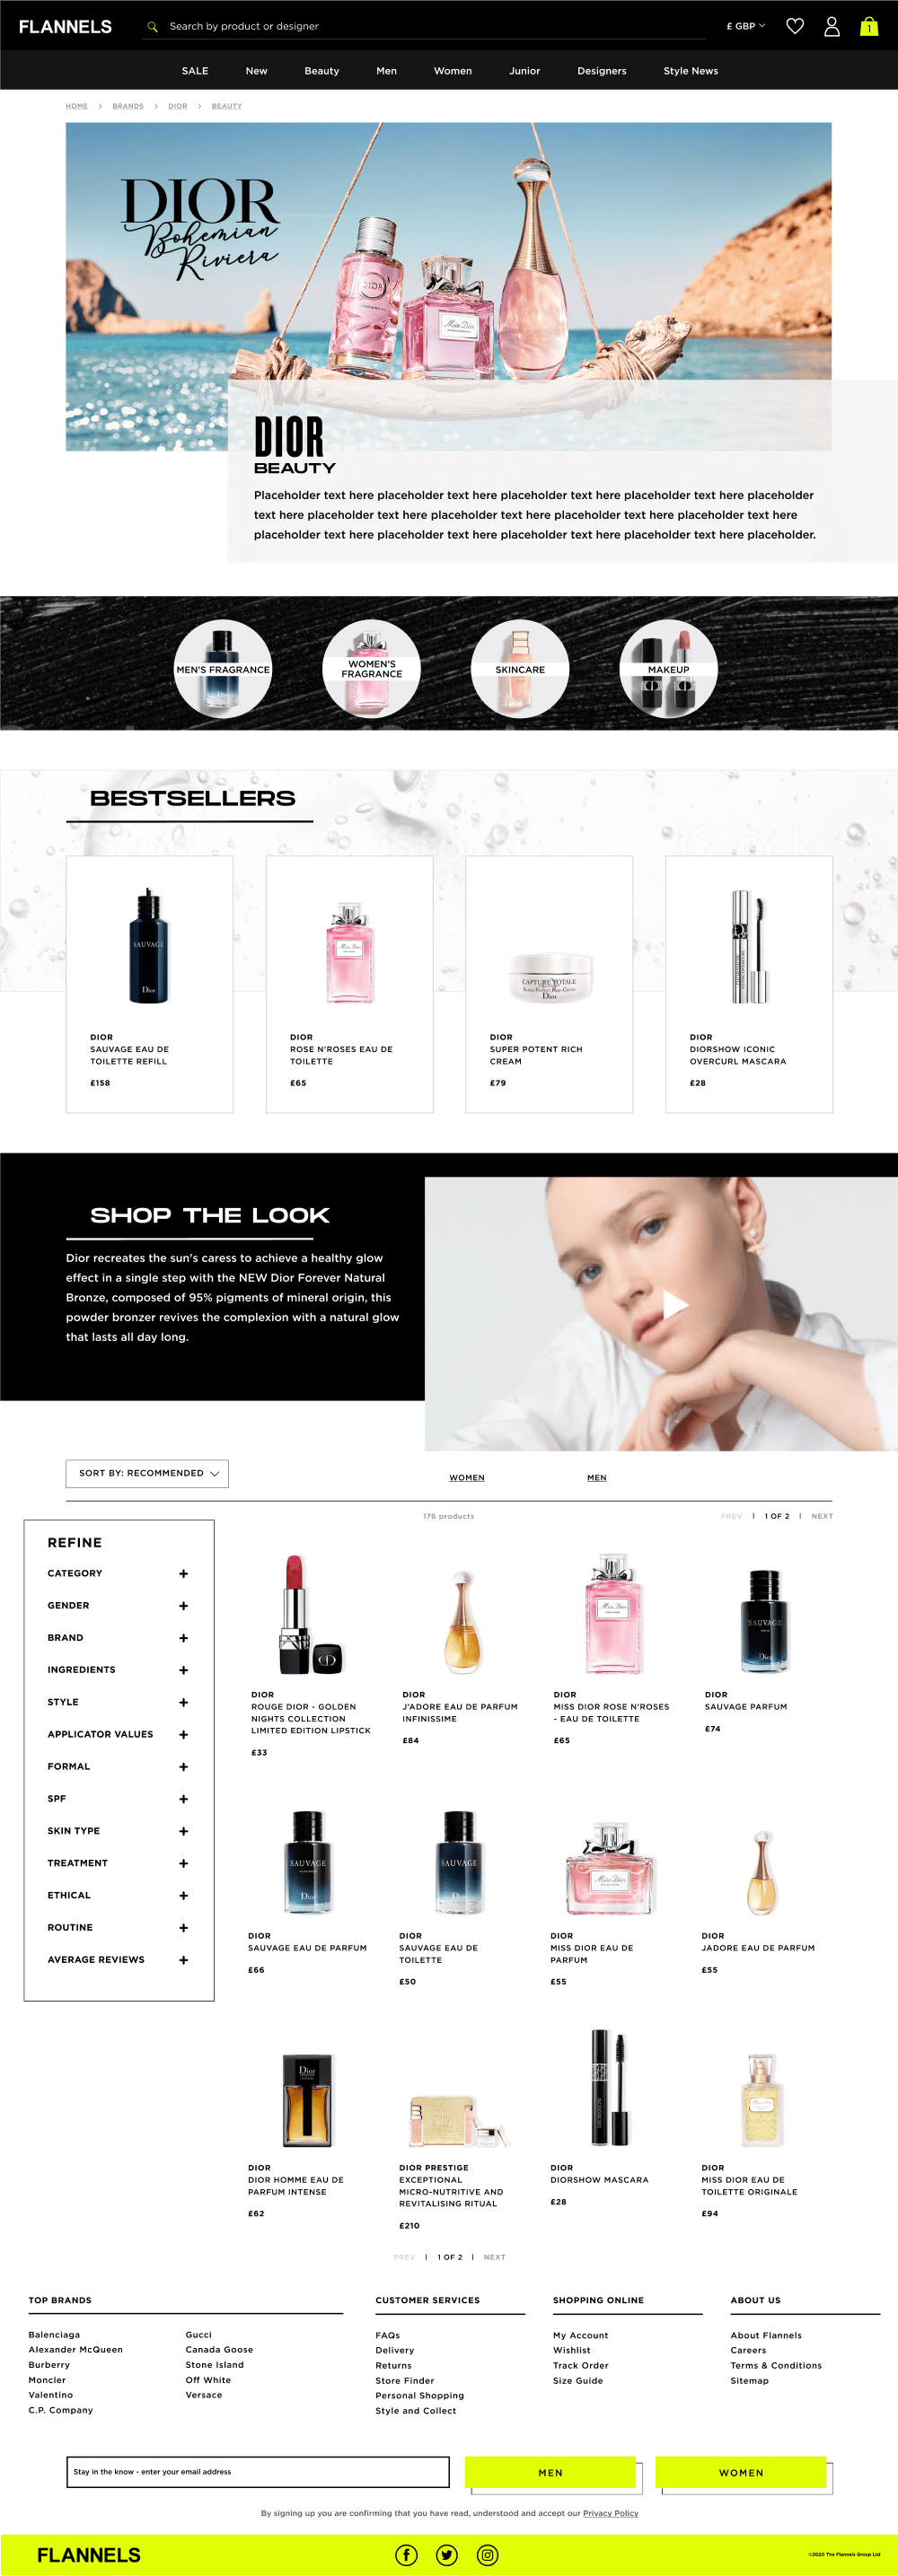 Design for a luxury fashion and beauty brand page